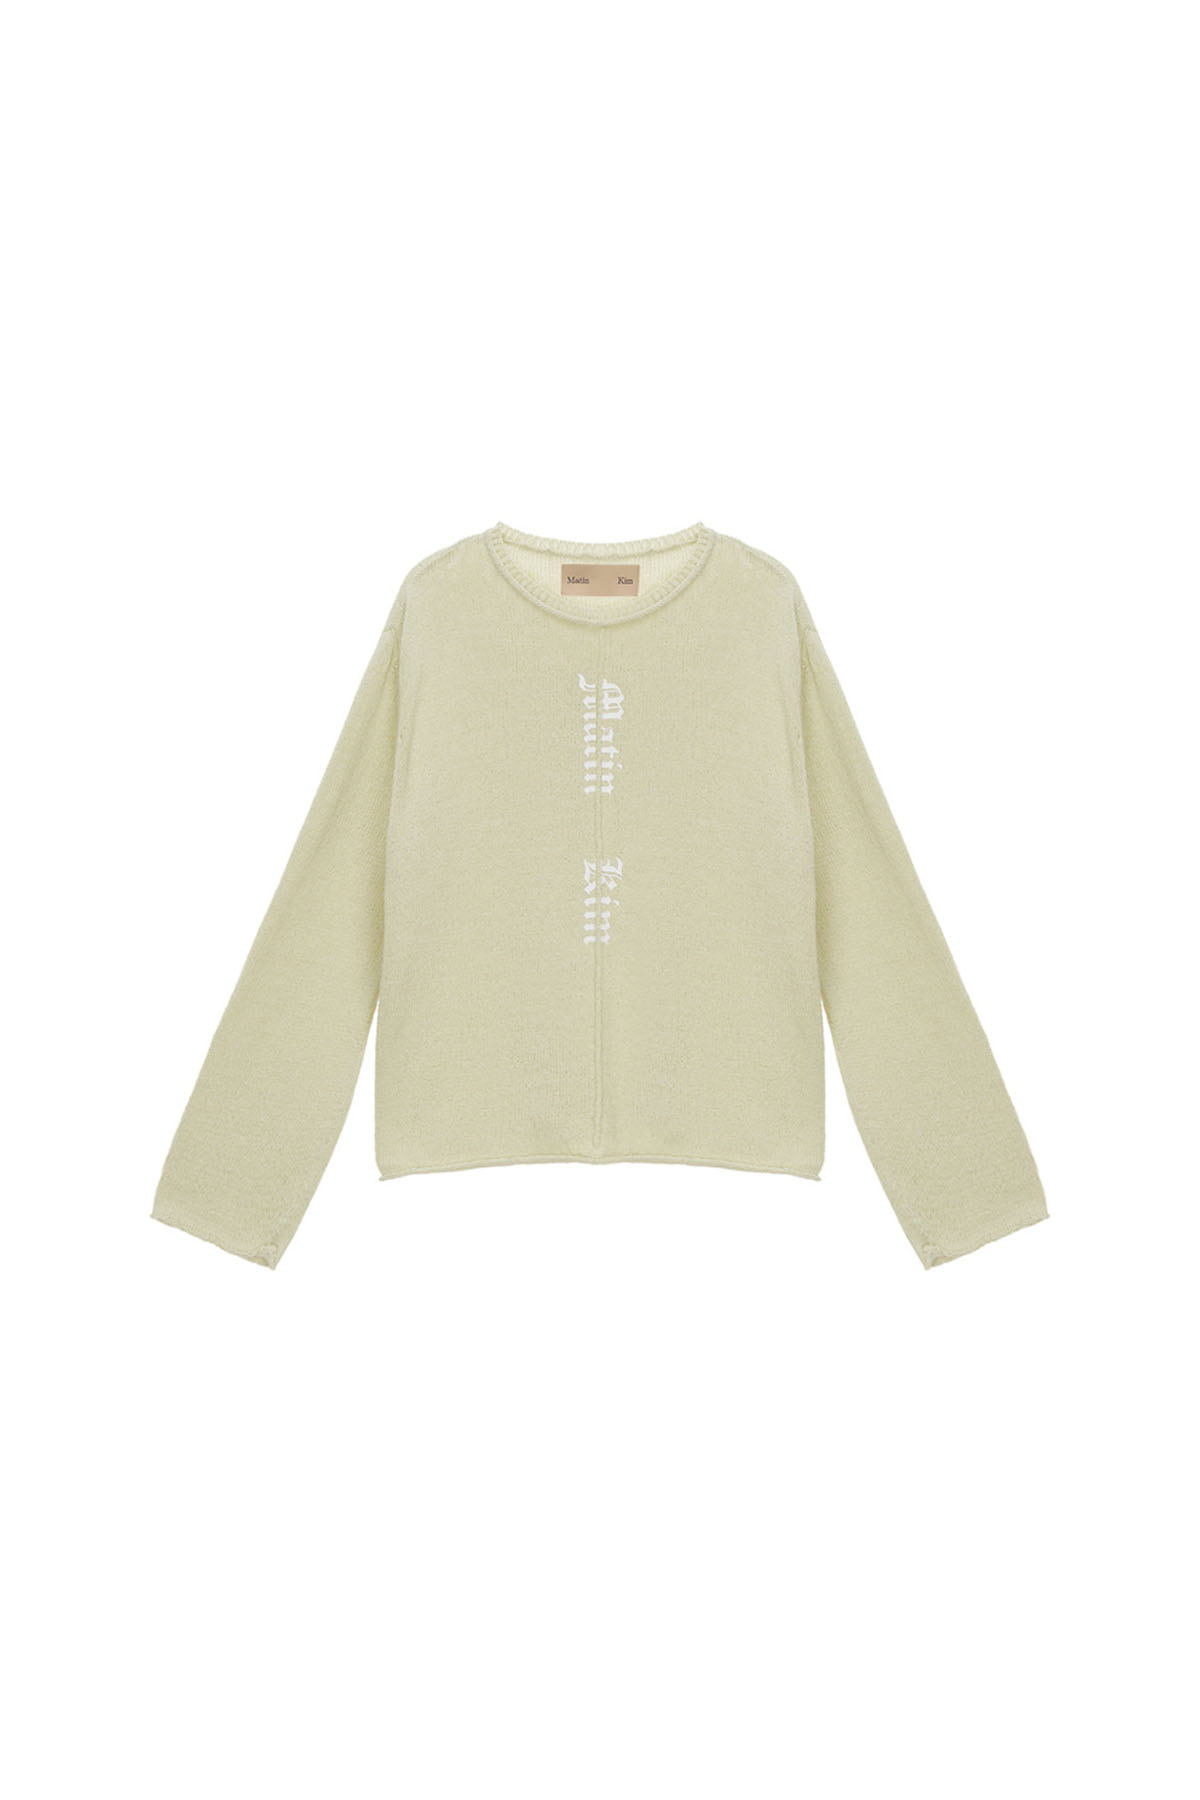 PINTUCK LOGO KNIT PULLOVER IN LIME